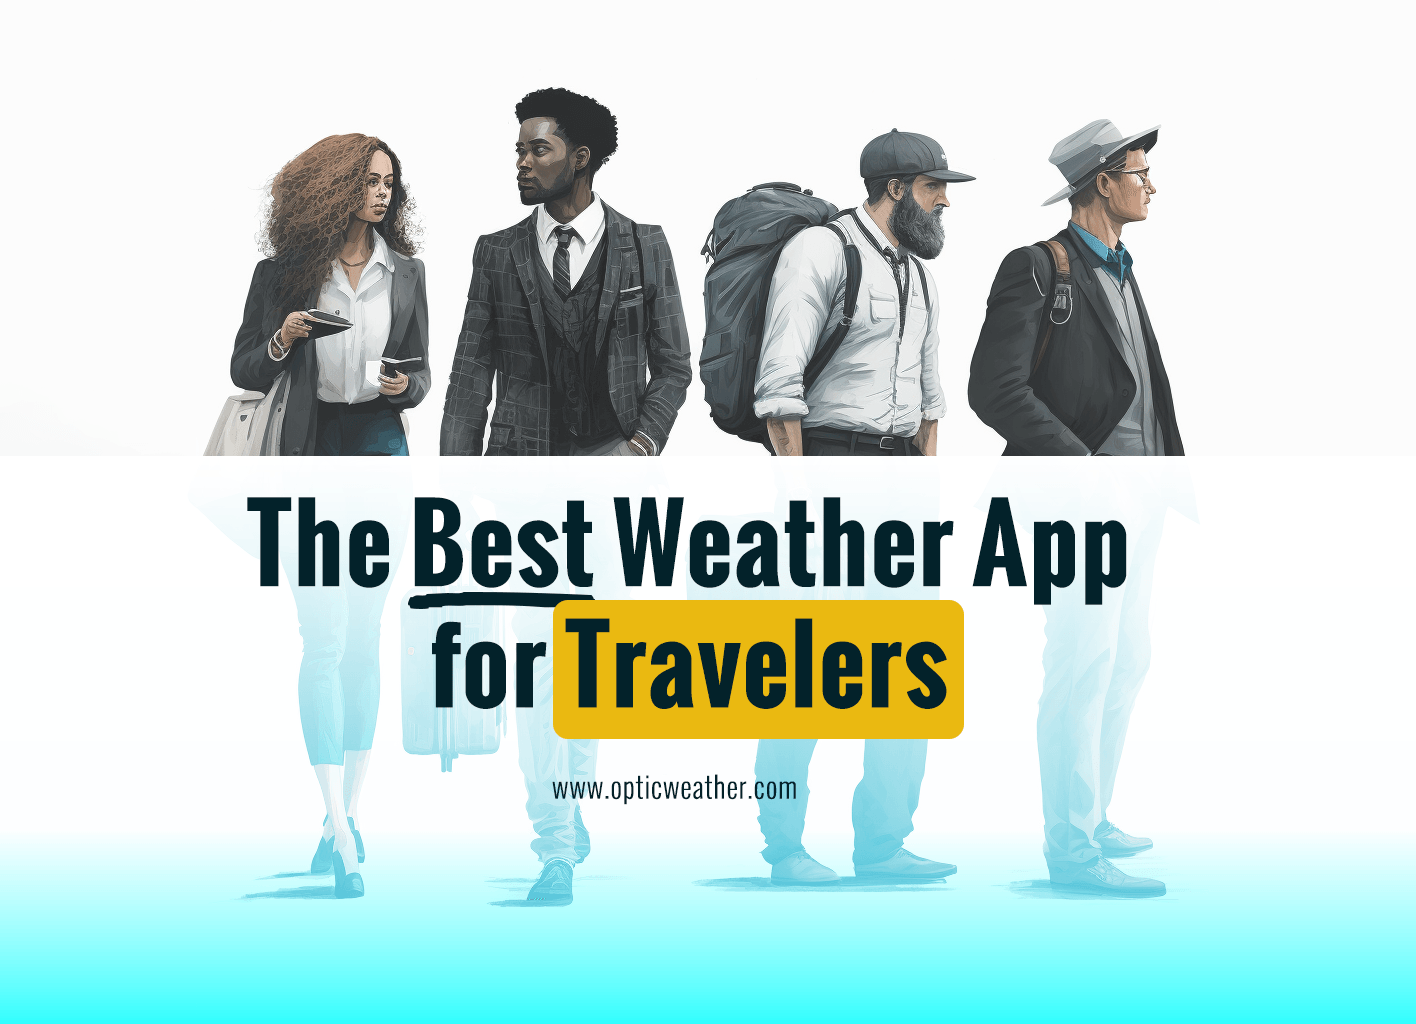 The Best weather app for travelers: How to stay prepared in any weather